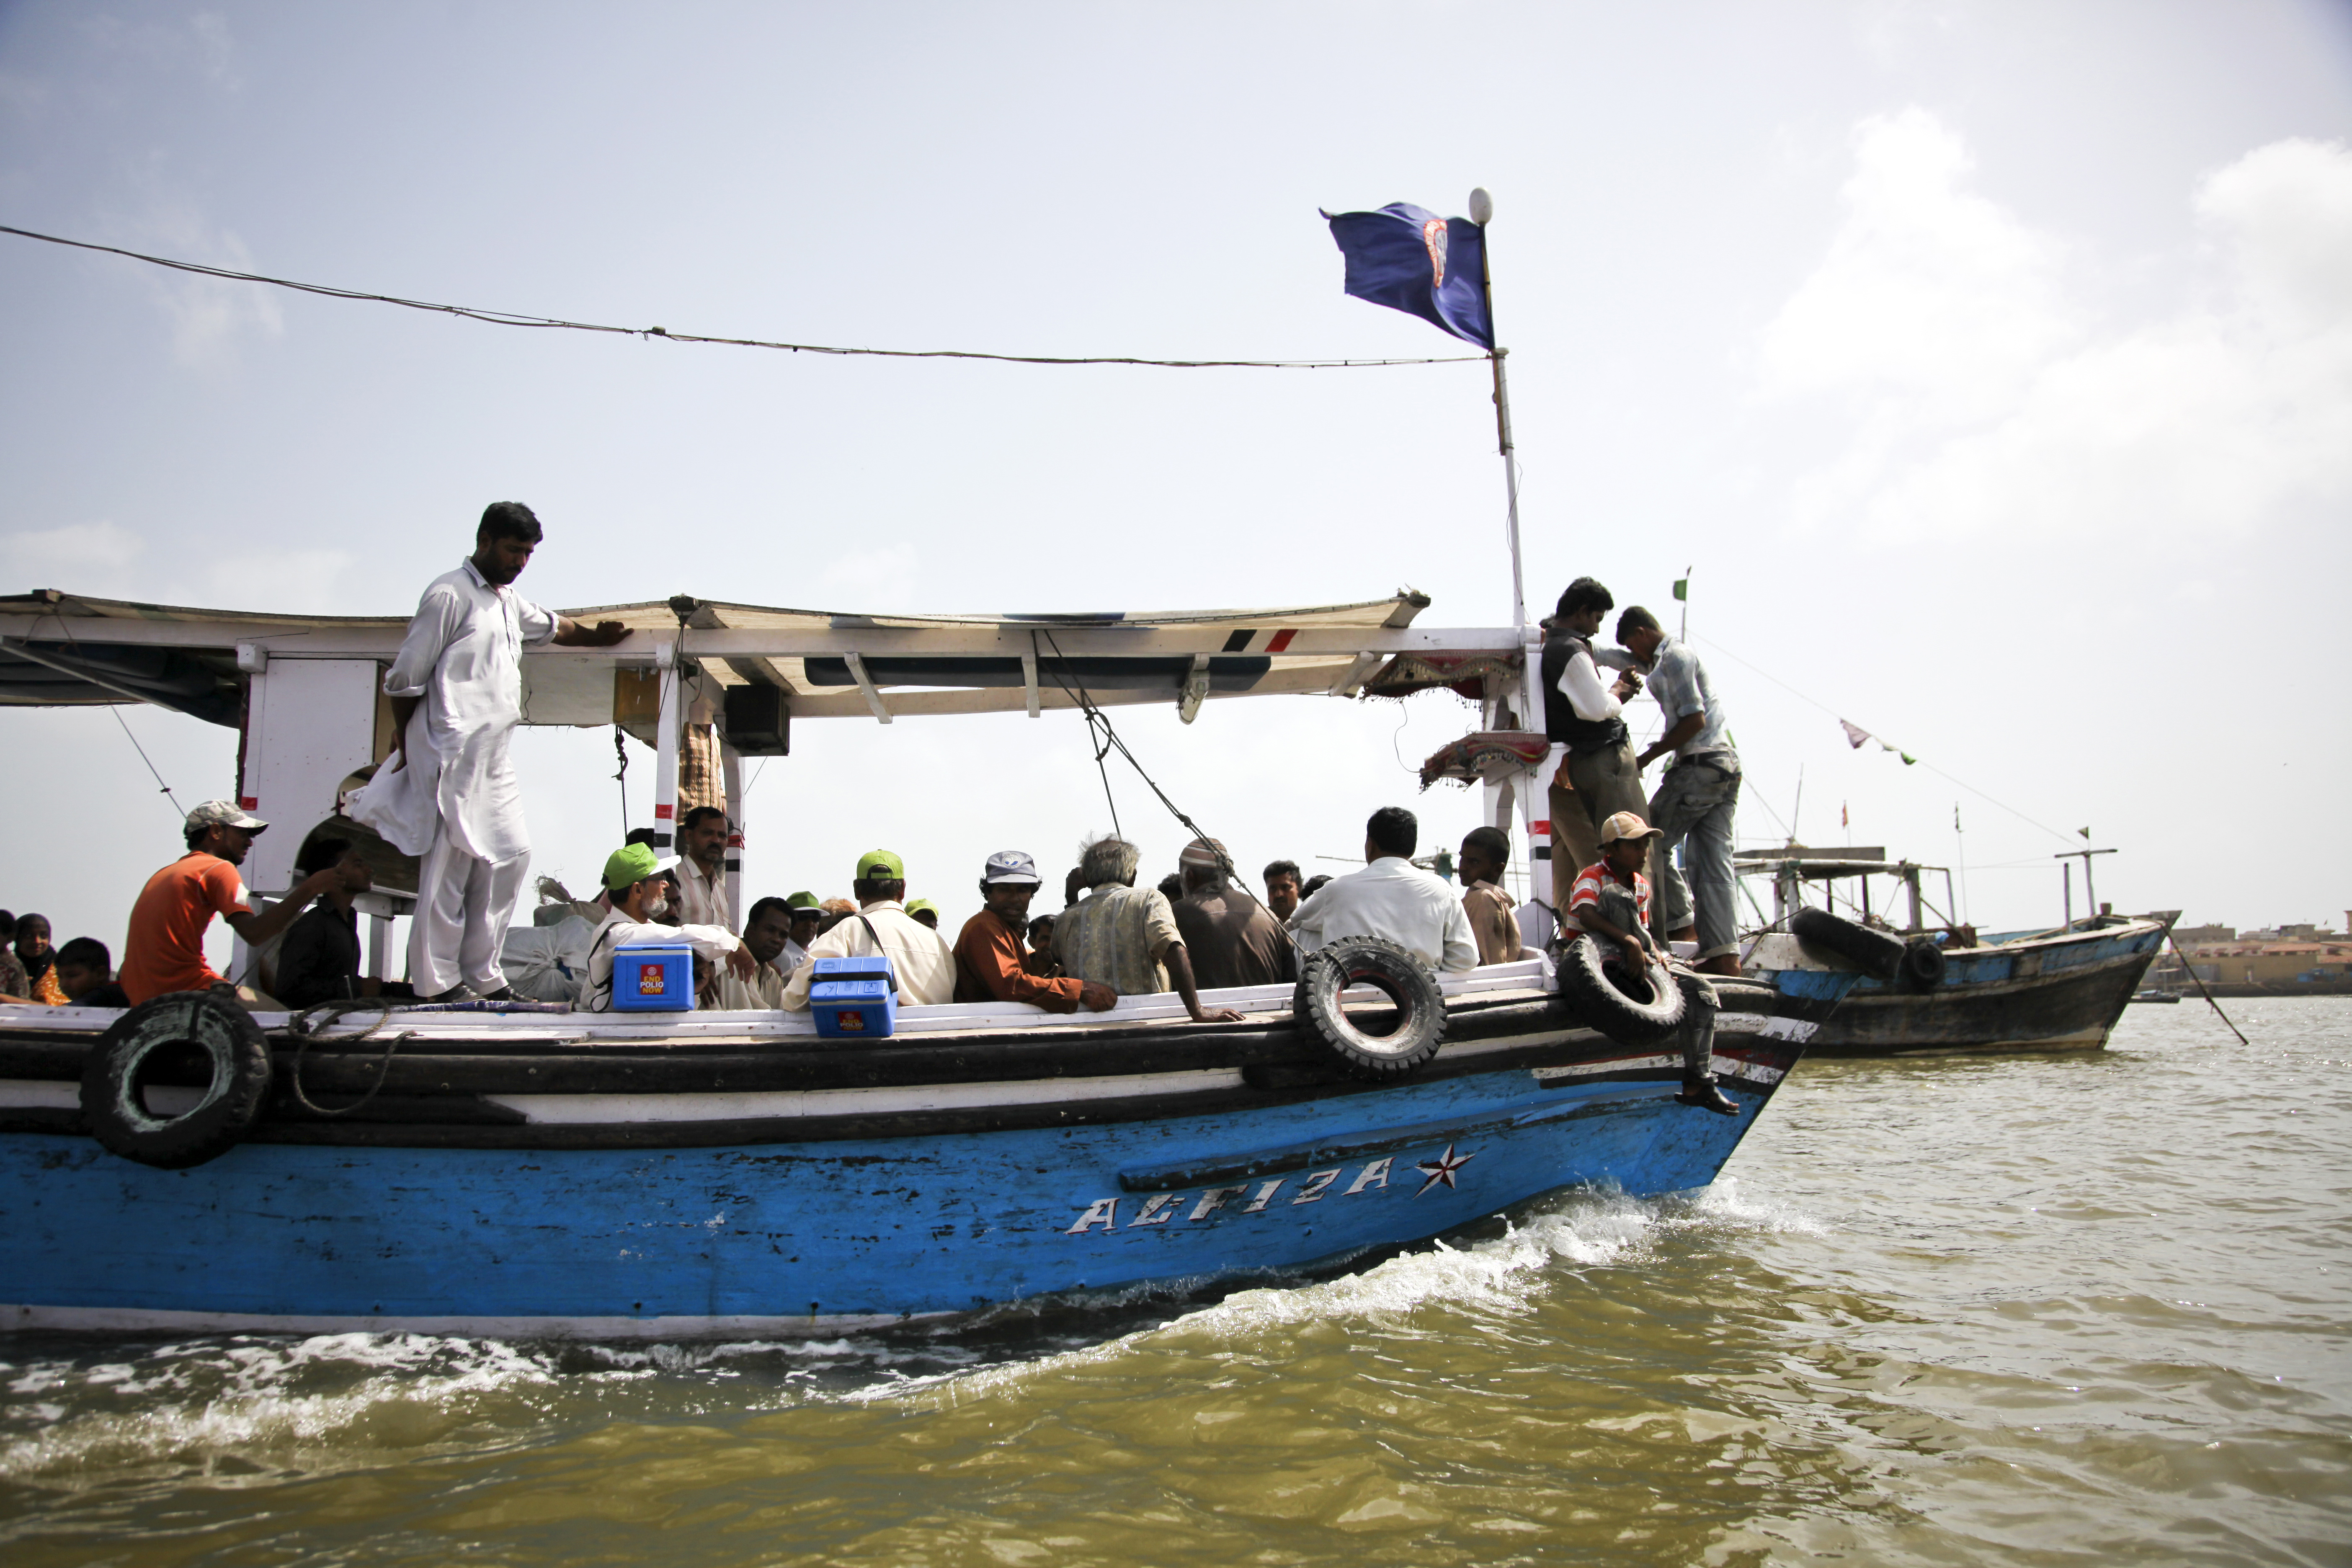 In Pakistan, one of the last three countries where the wild polio virus is endemic, Rotary health workers (in green caps) travel by boat to immunize the children of Karachi’s Bath Island. Since Rotary, UNICEF’s partner in the Global Polio Eradication Init